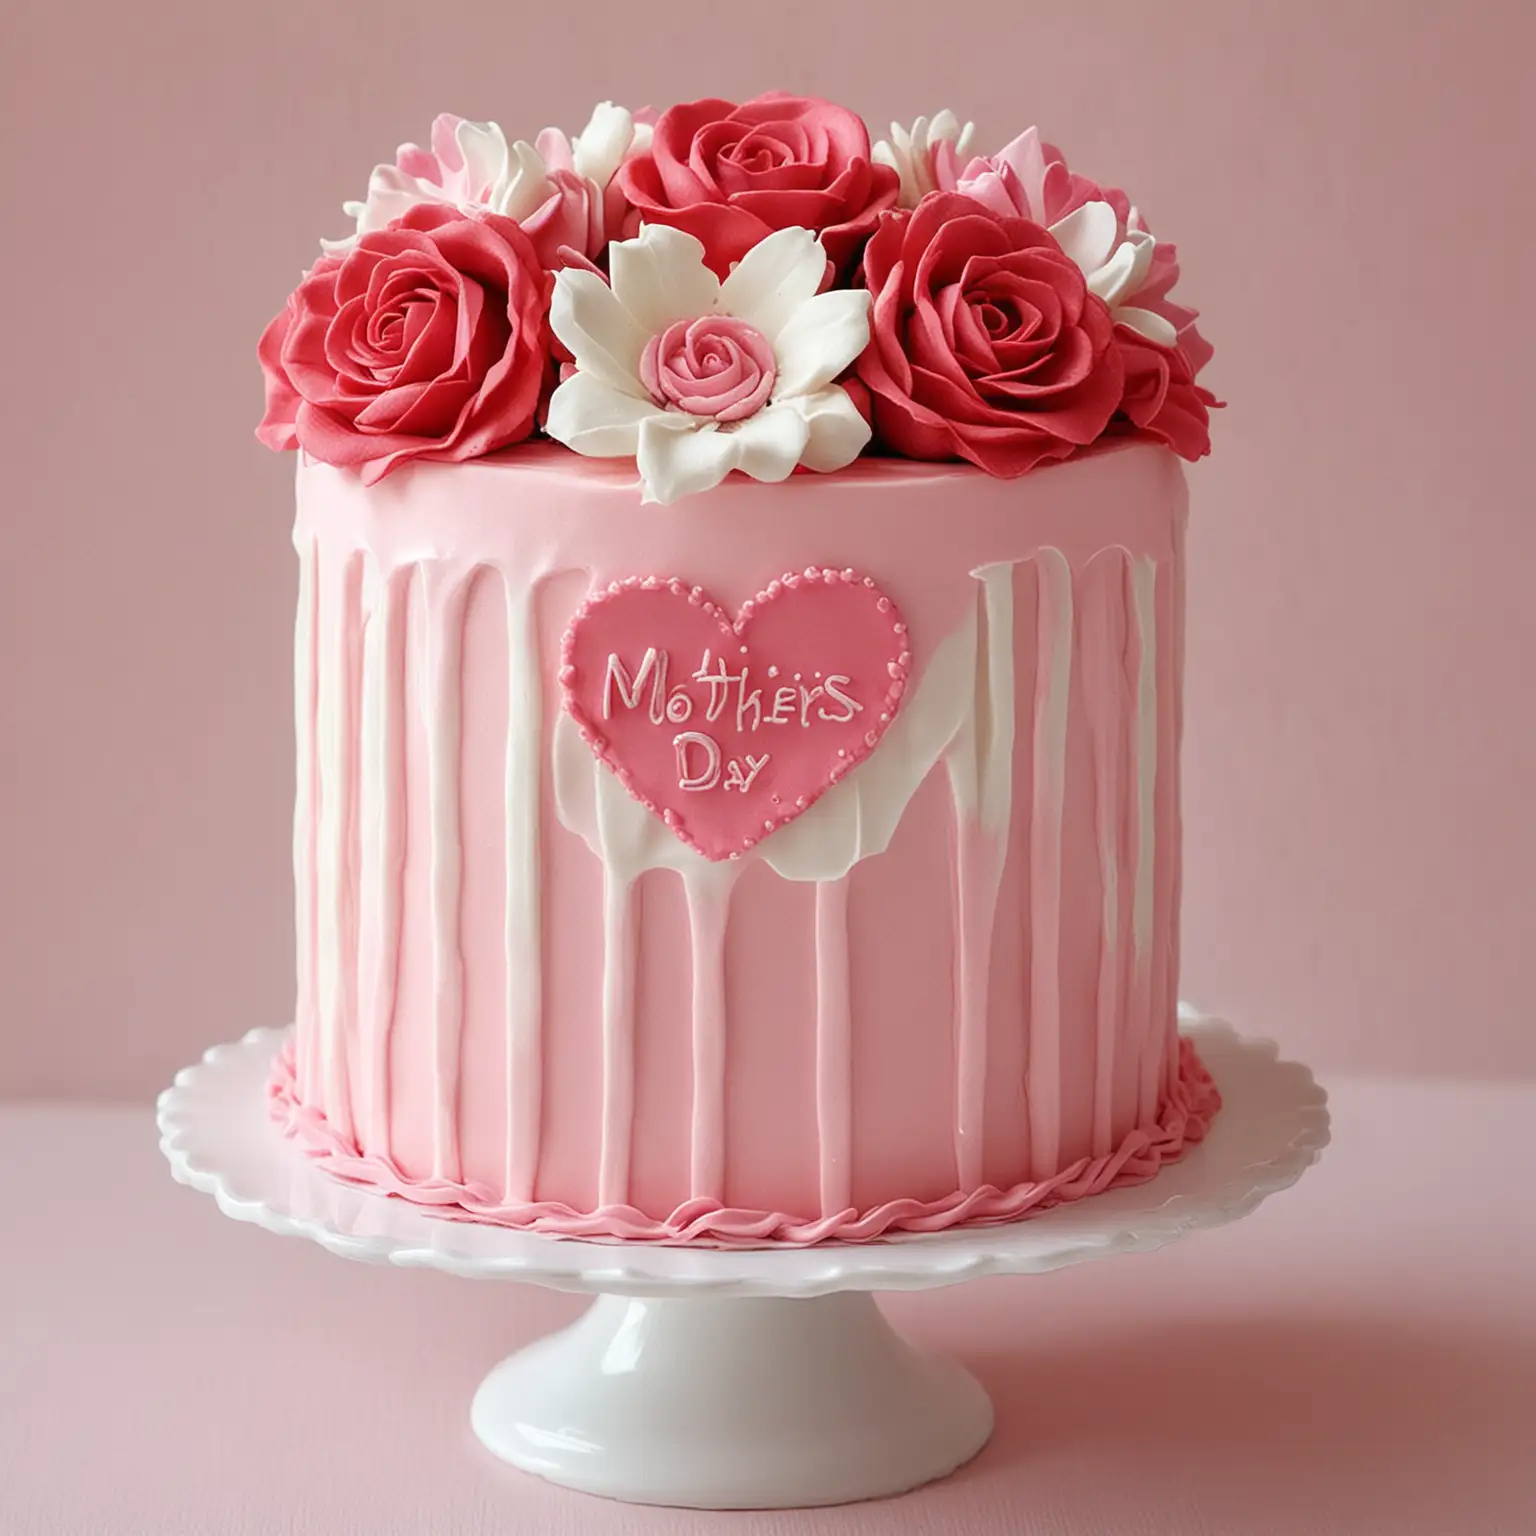 simple and cute mothers day cakes ideas in red, white and pink theme